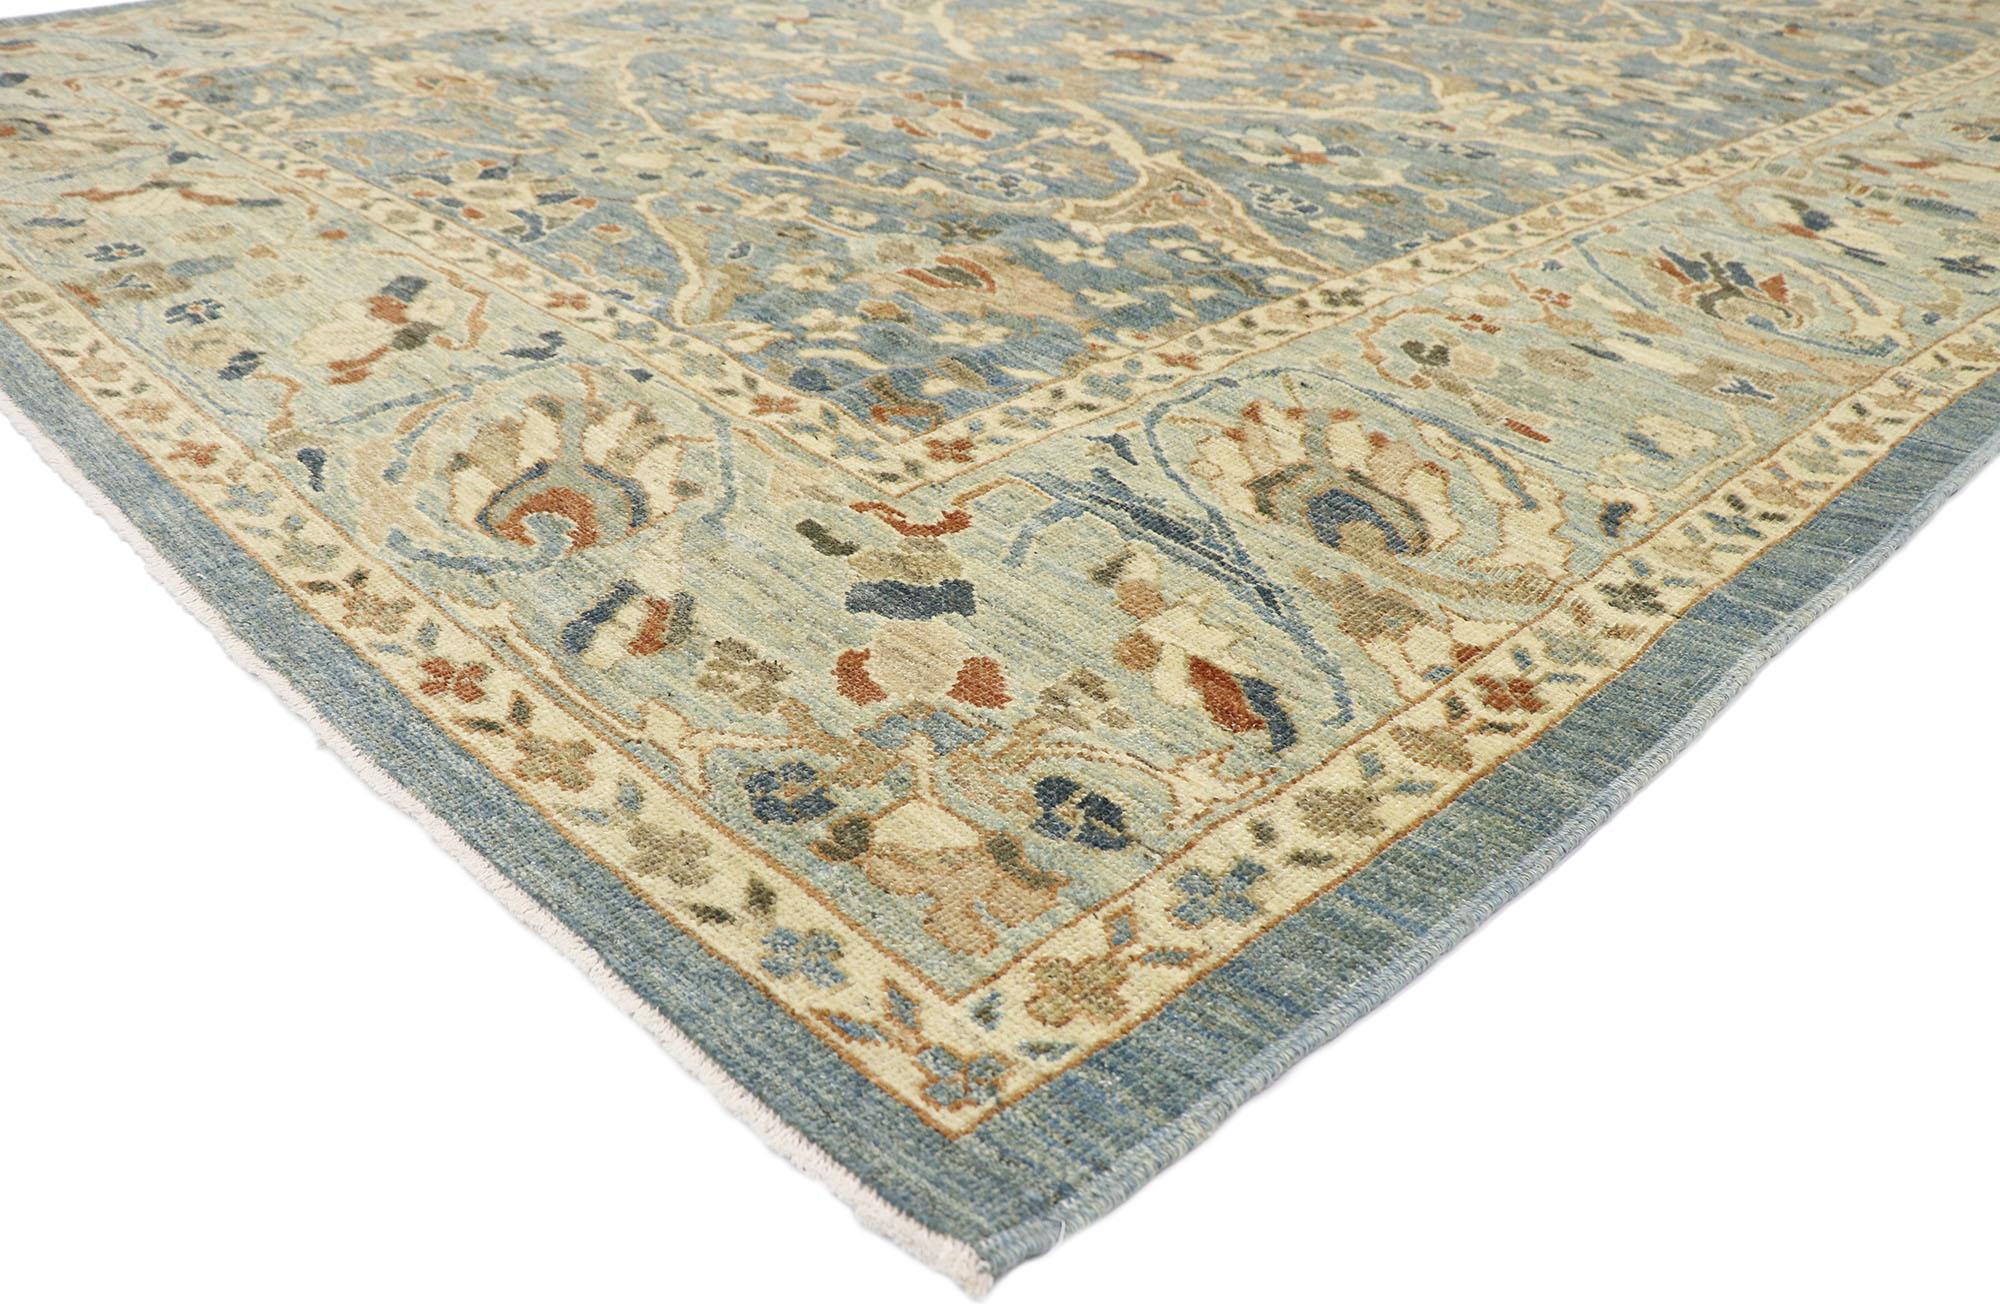 60917, new Contemporary Persian Sultanabad rug with Modern Coastal Style 09'03 x 12'03. This hand-knotted wool contemporary Persian Sultanabad rug features an all-over botanical trellis pattern spread across an abrashed cerulean hued field. An array